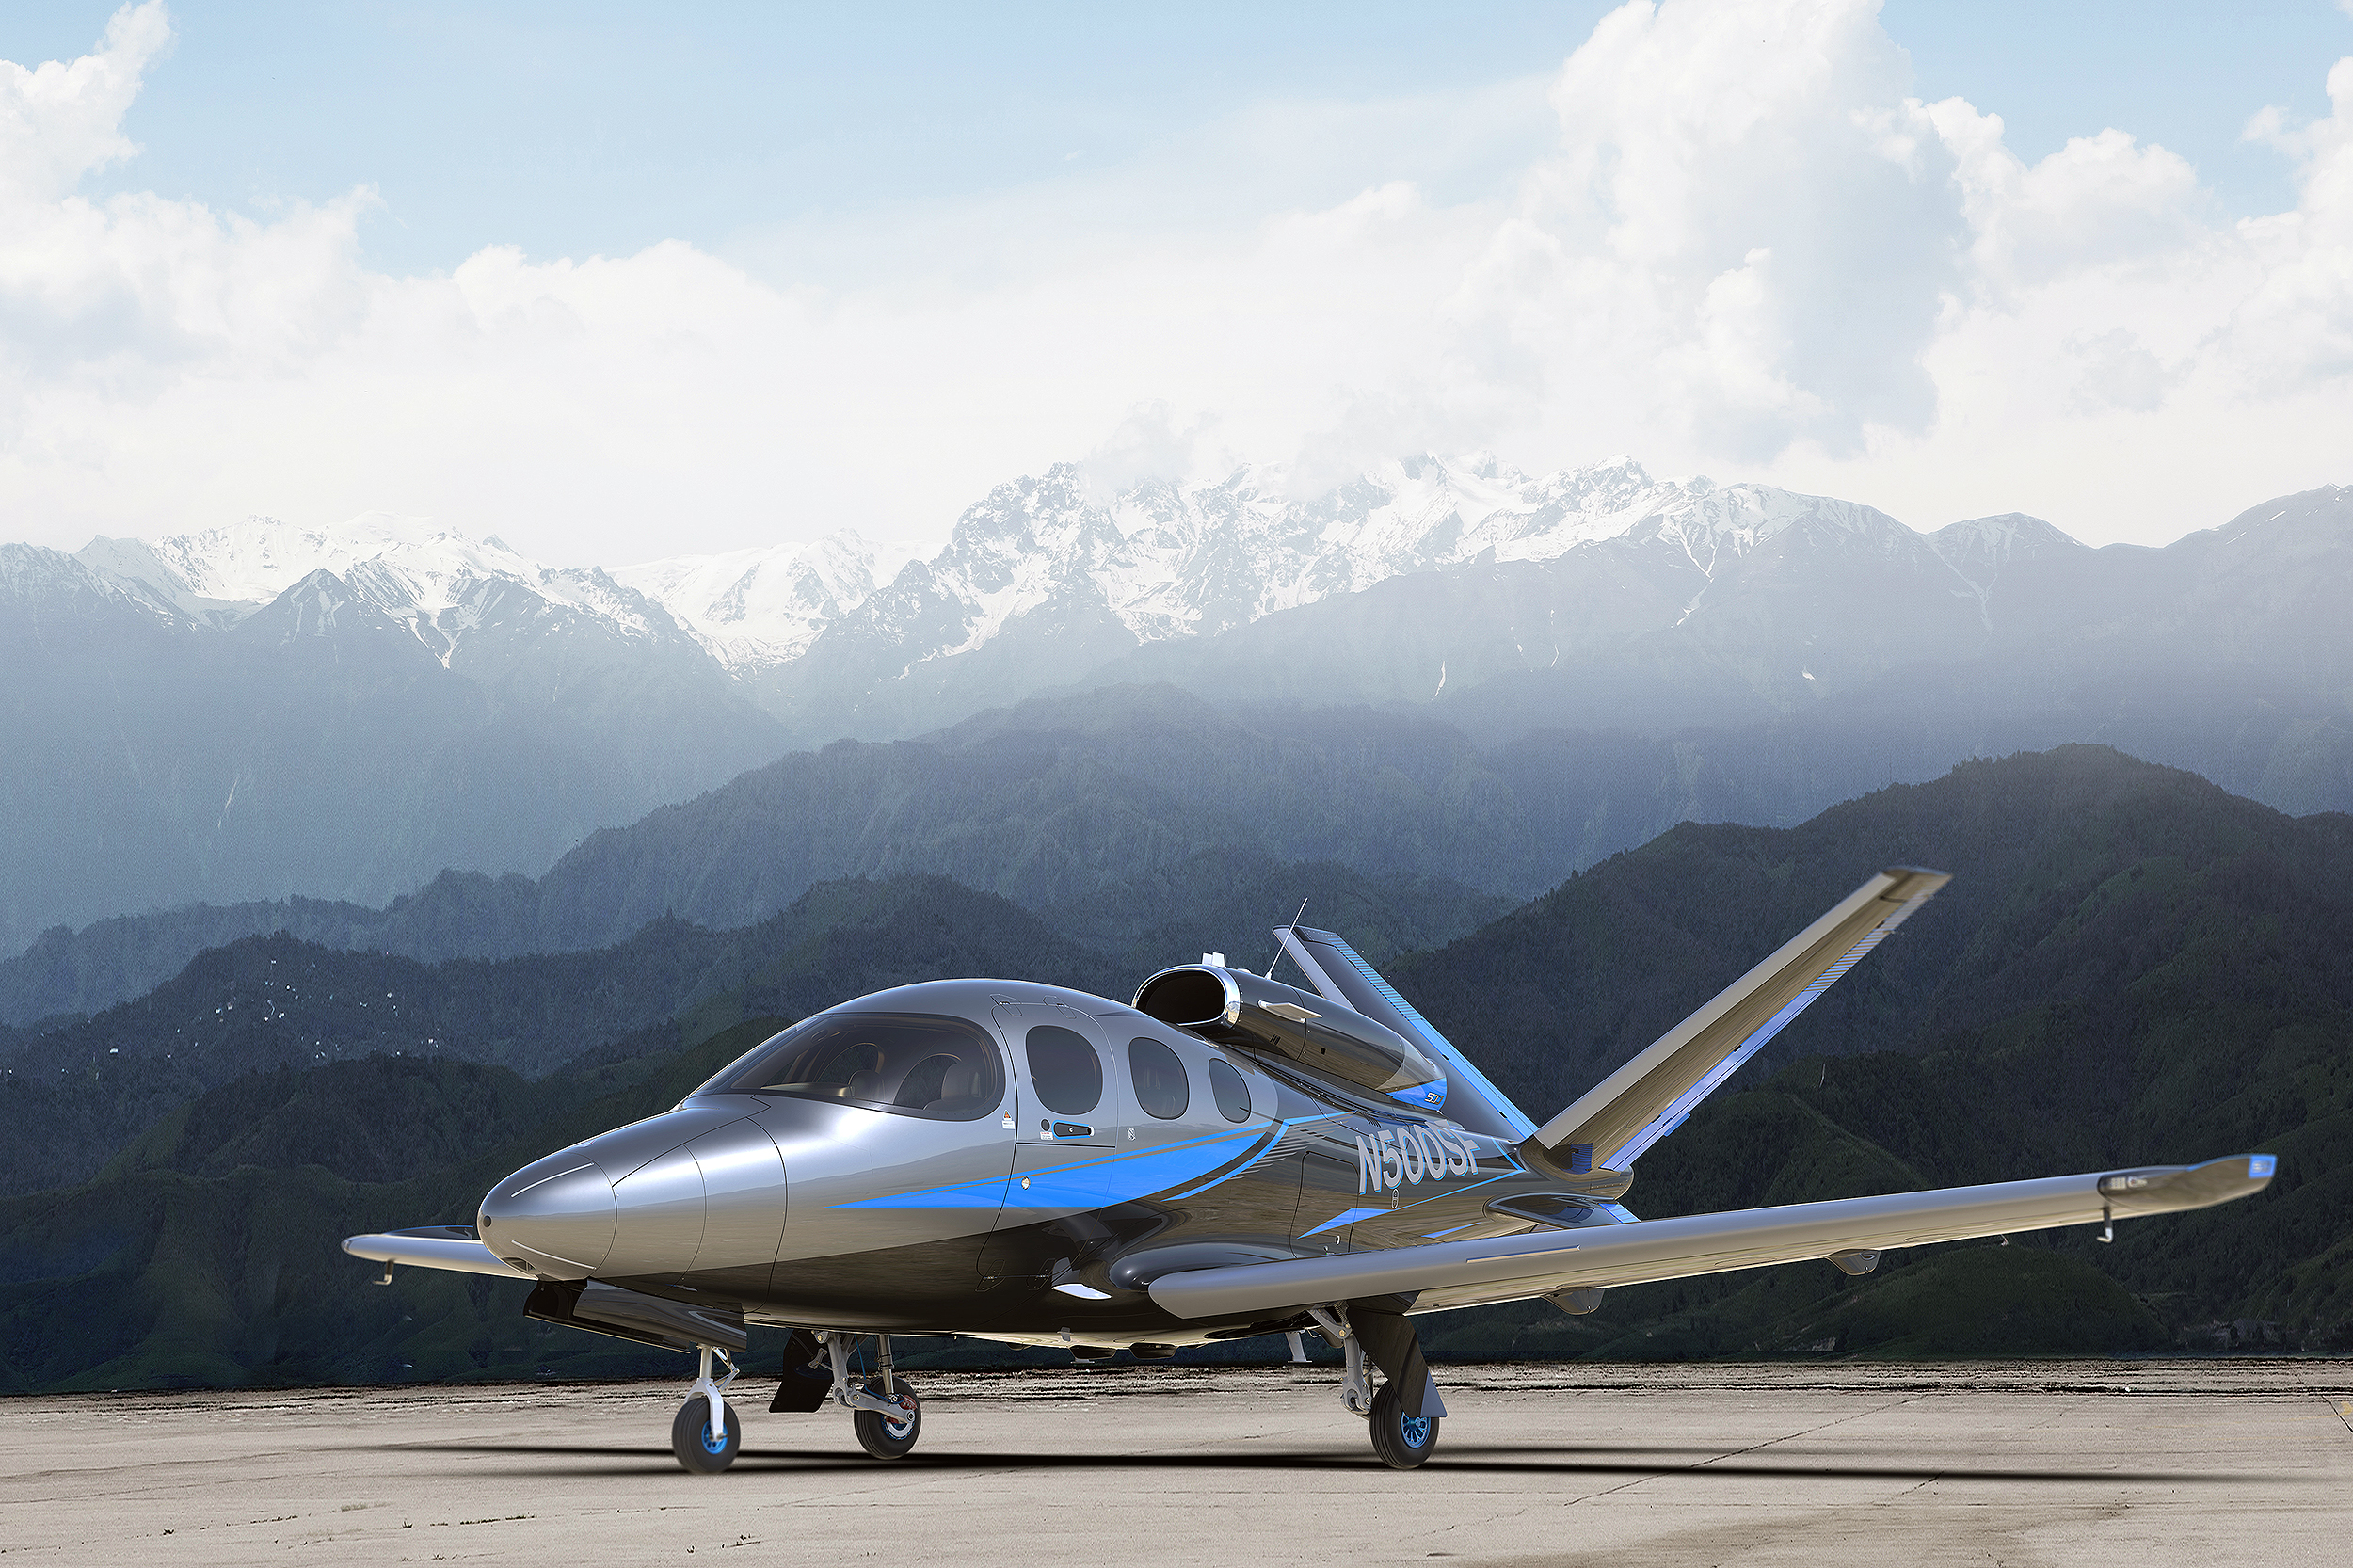 Prefer your Cirrus Vision Jet in a lighter shade? This is the 'Meteorite' scheme